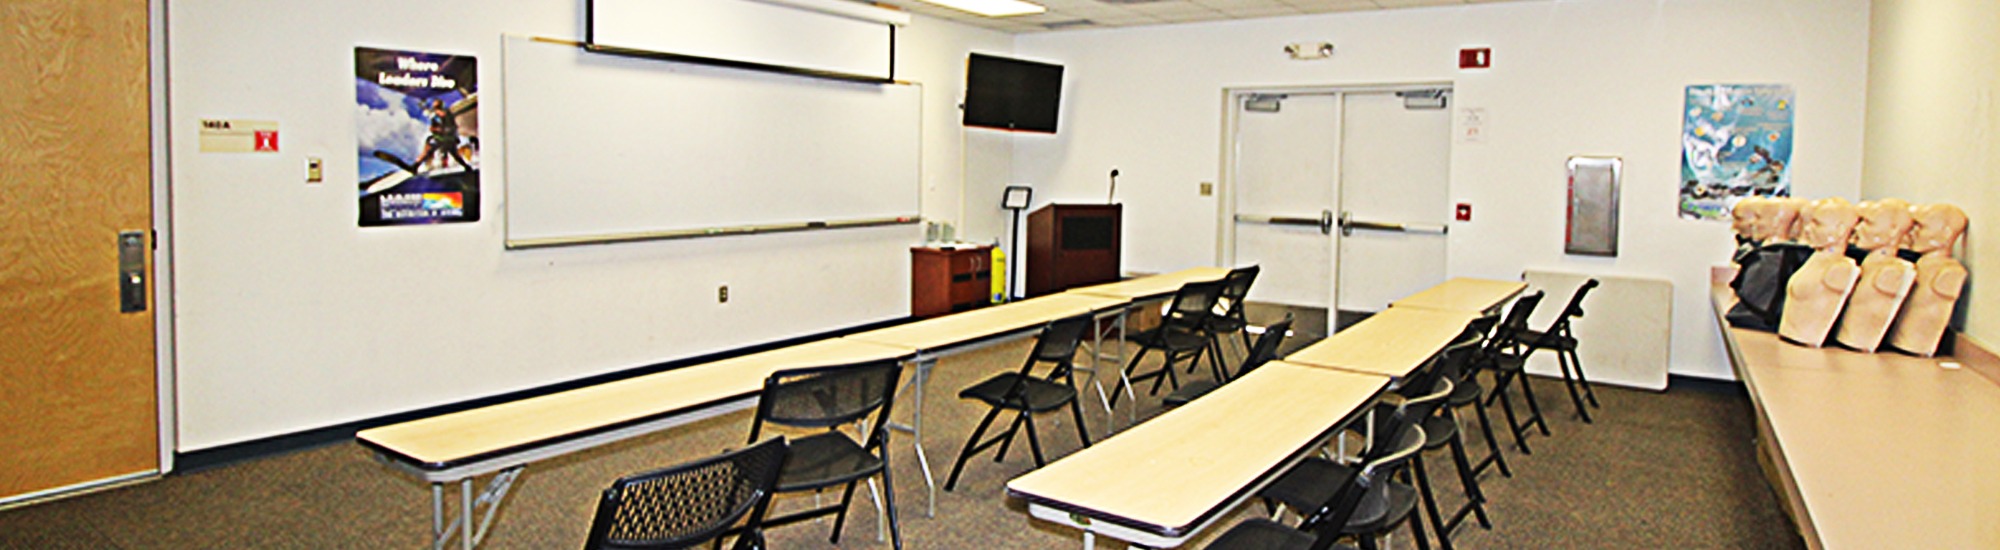 Conference room with tables, chairs, white boards, and CPR training dummies.